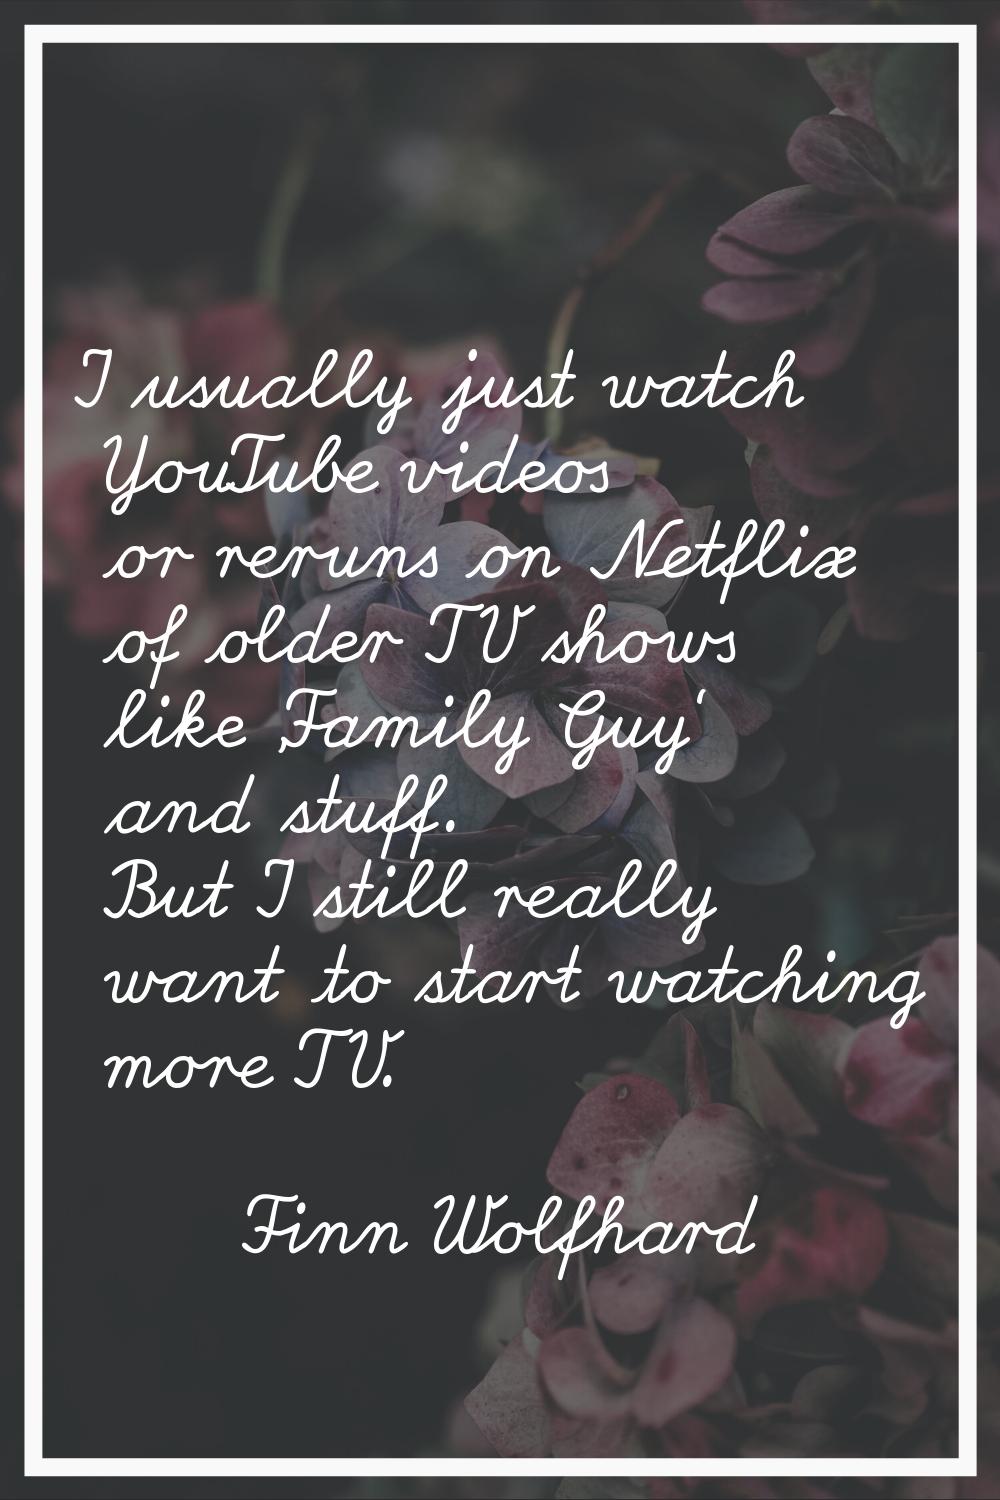 I usually just watch YouTube videos or reruns on Netflix of older TV shows like 'Family Guy' and st